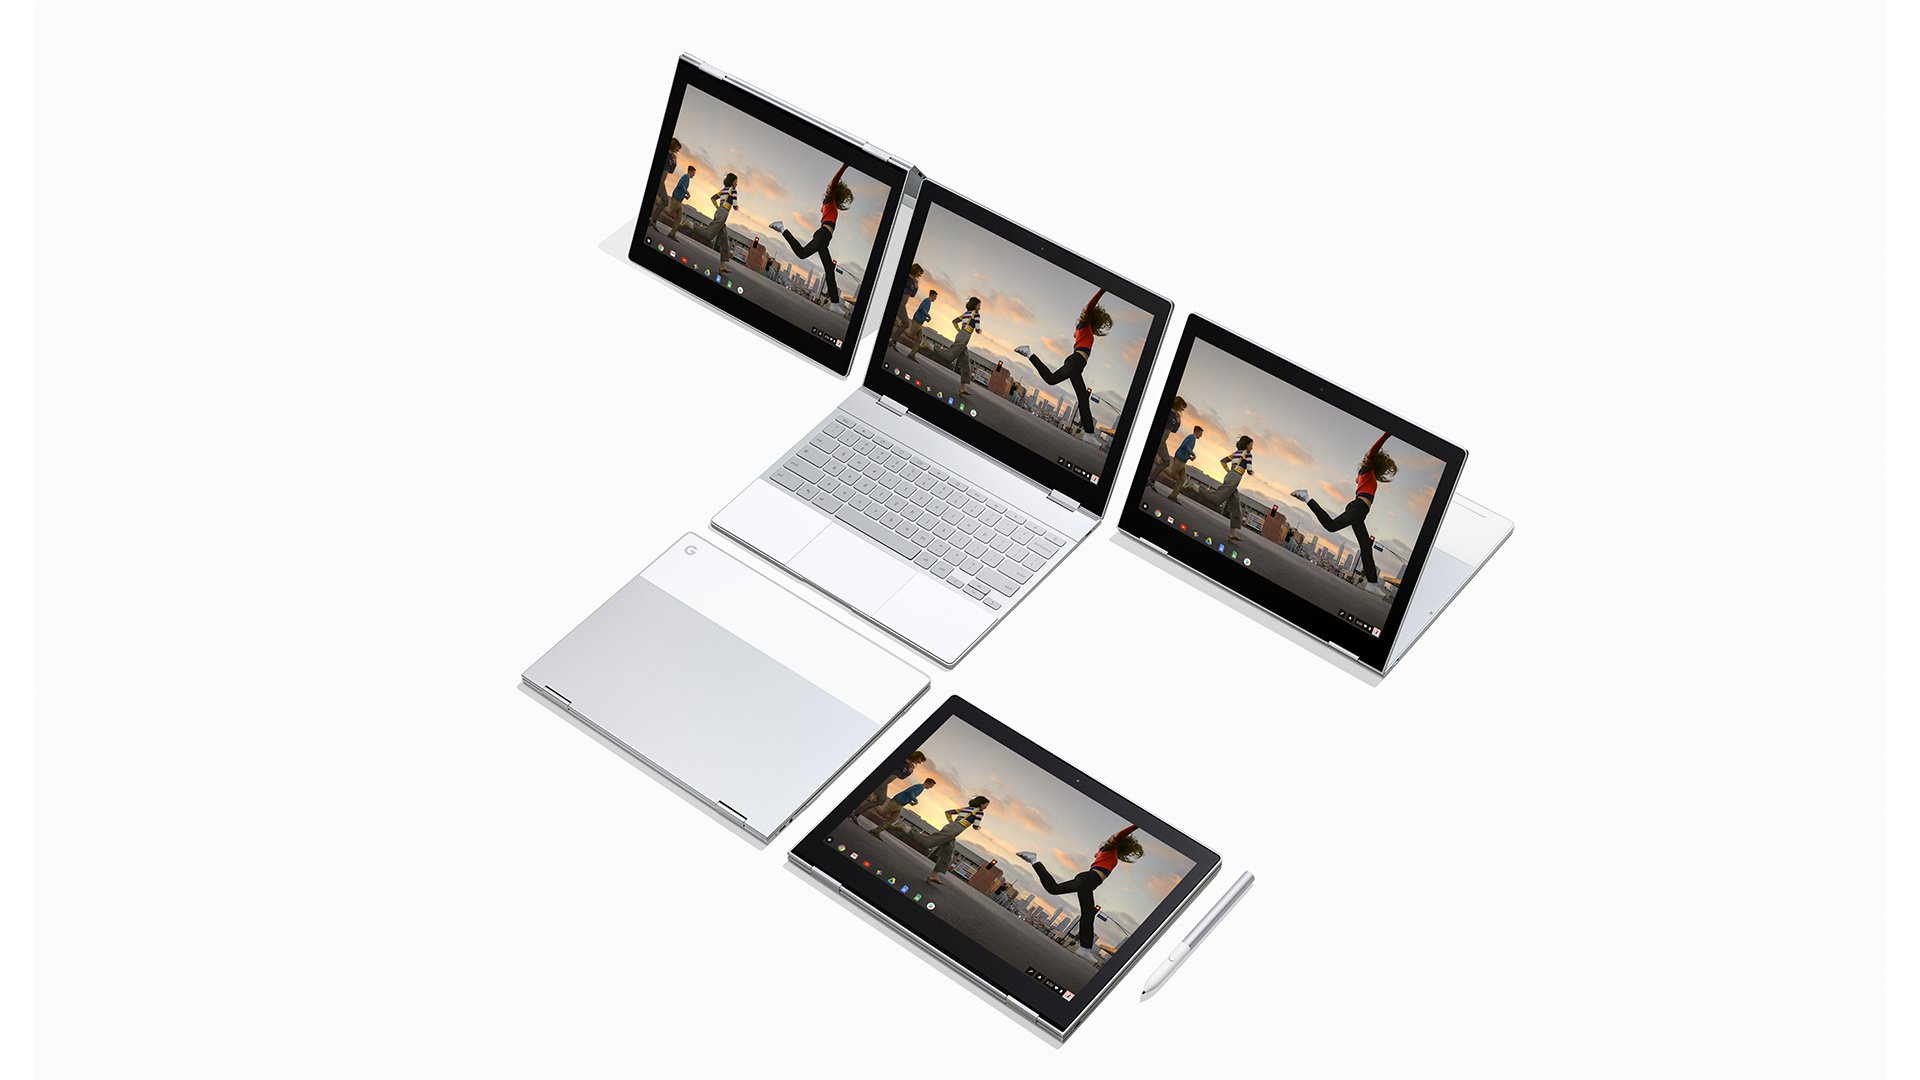 Google Pixelbook Features And Specifications